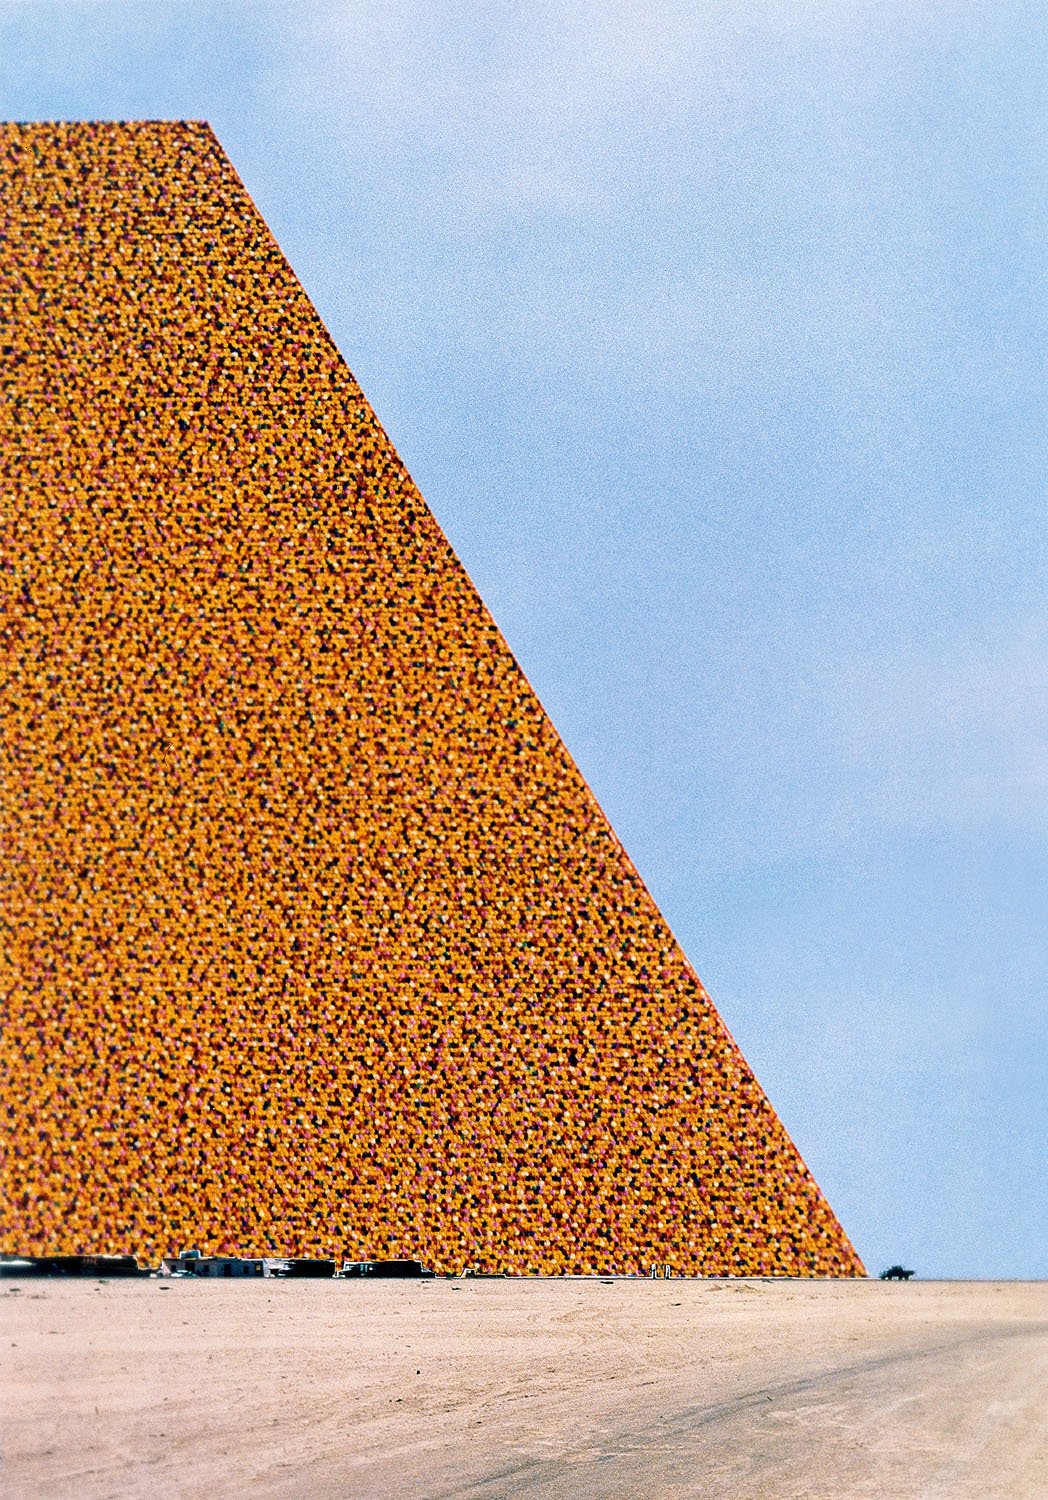 Christo, The Mastaba of Abu Dhabi (Project for United Arab Emirates), Collaged photographs 1979 (Detail), 56 x 35.5 cm, pencil and two photographs by Wolfgang Volz. Photo: André Grossmann © 1979 Christo